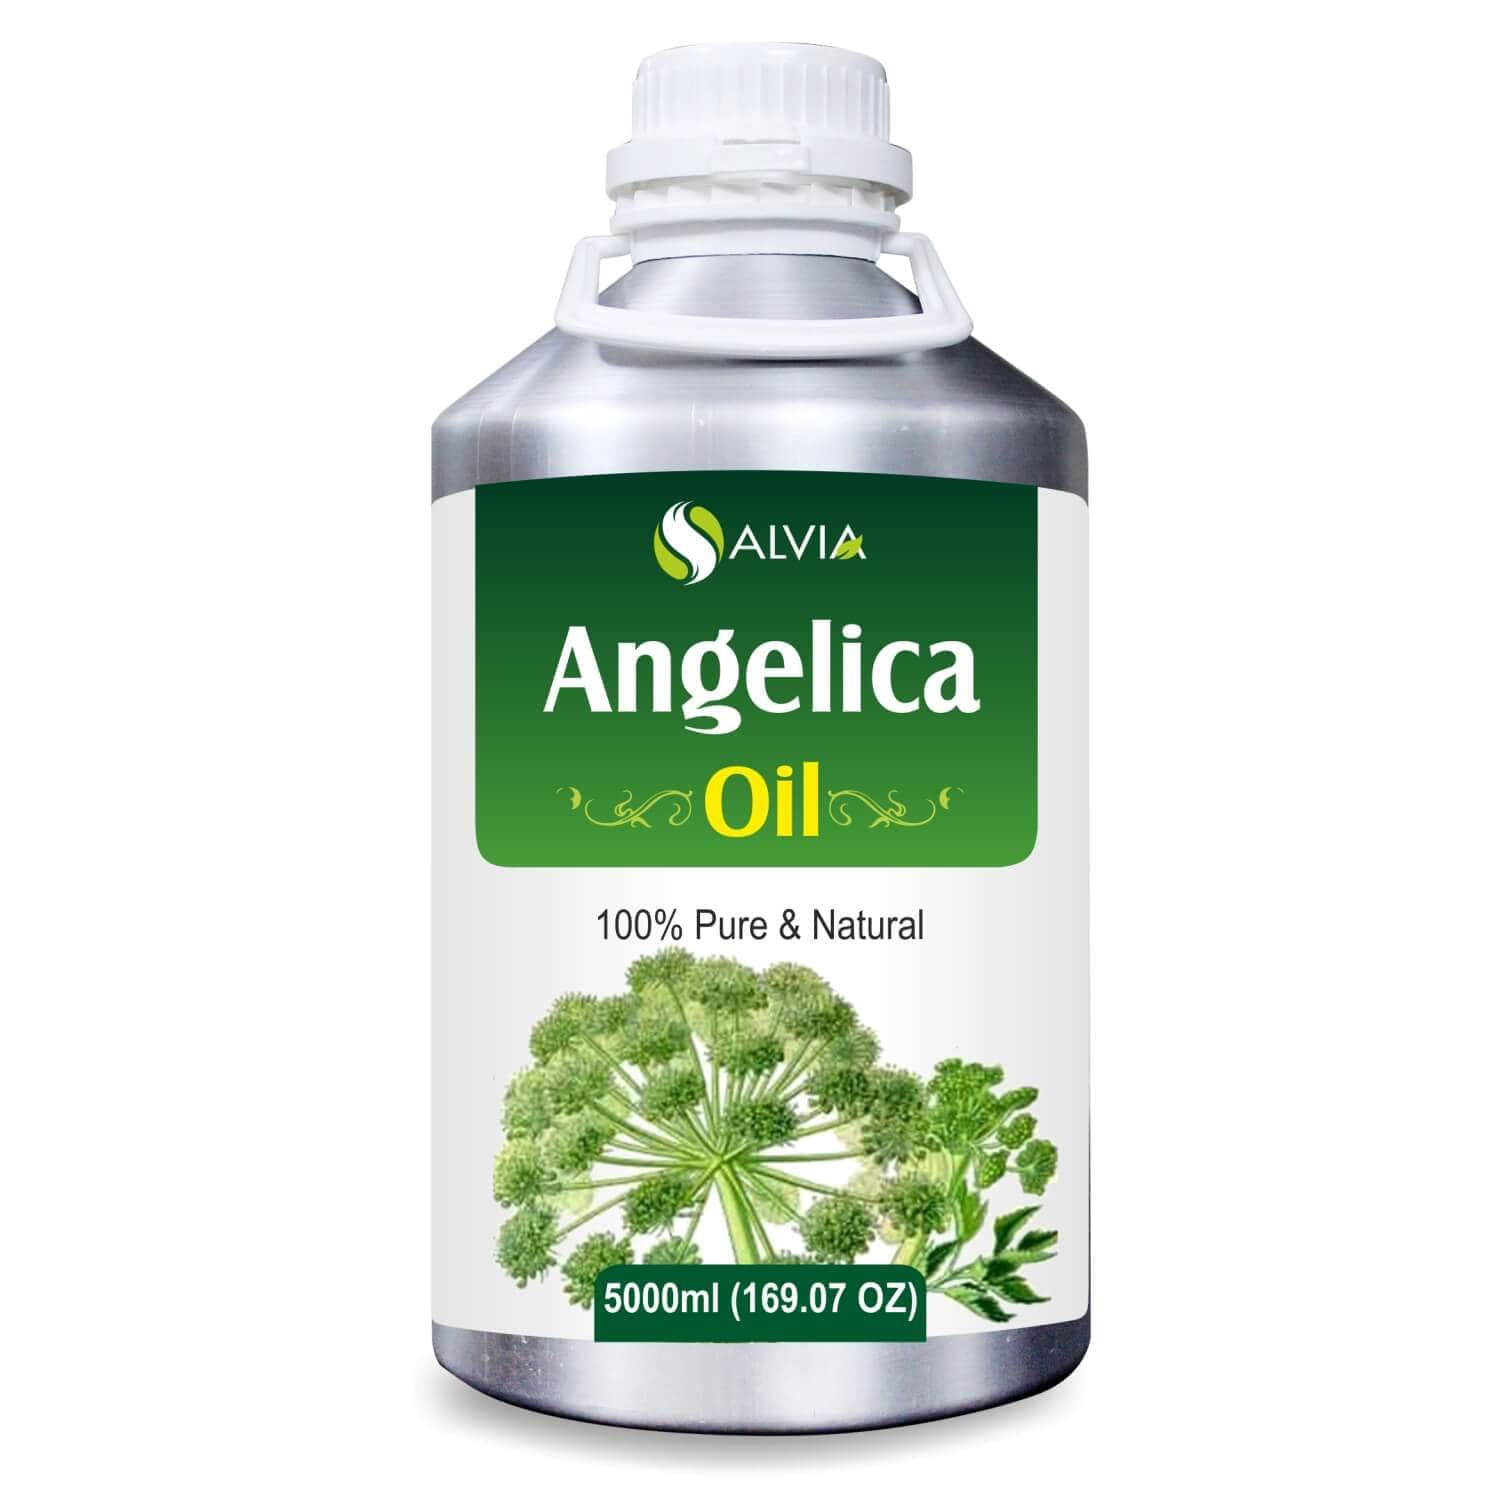 Salvia Natural Essential Oils 5000ml Angelica Essential Oil, 100% Pure, Natural & Undiluted - for Skin Care, Perfume making, Acne, Eases Coughs, Cold & Congestion